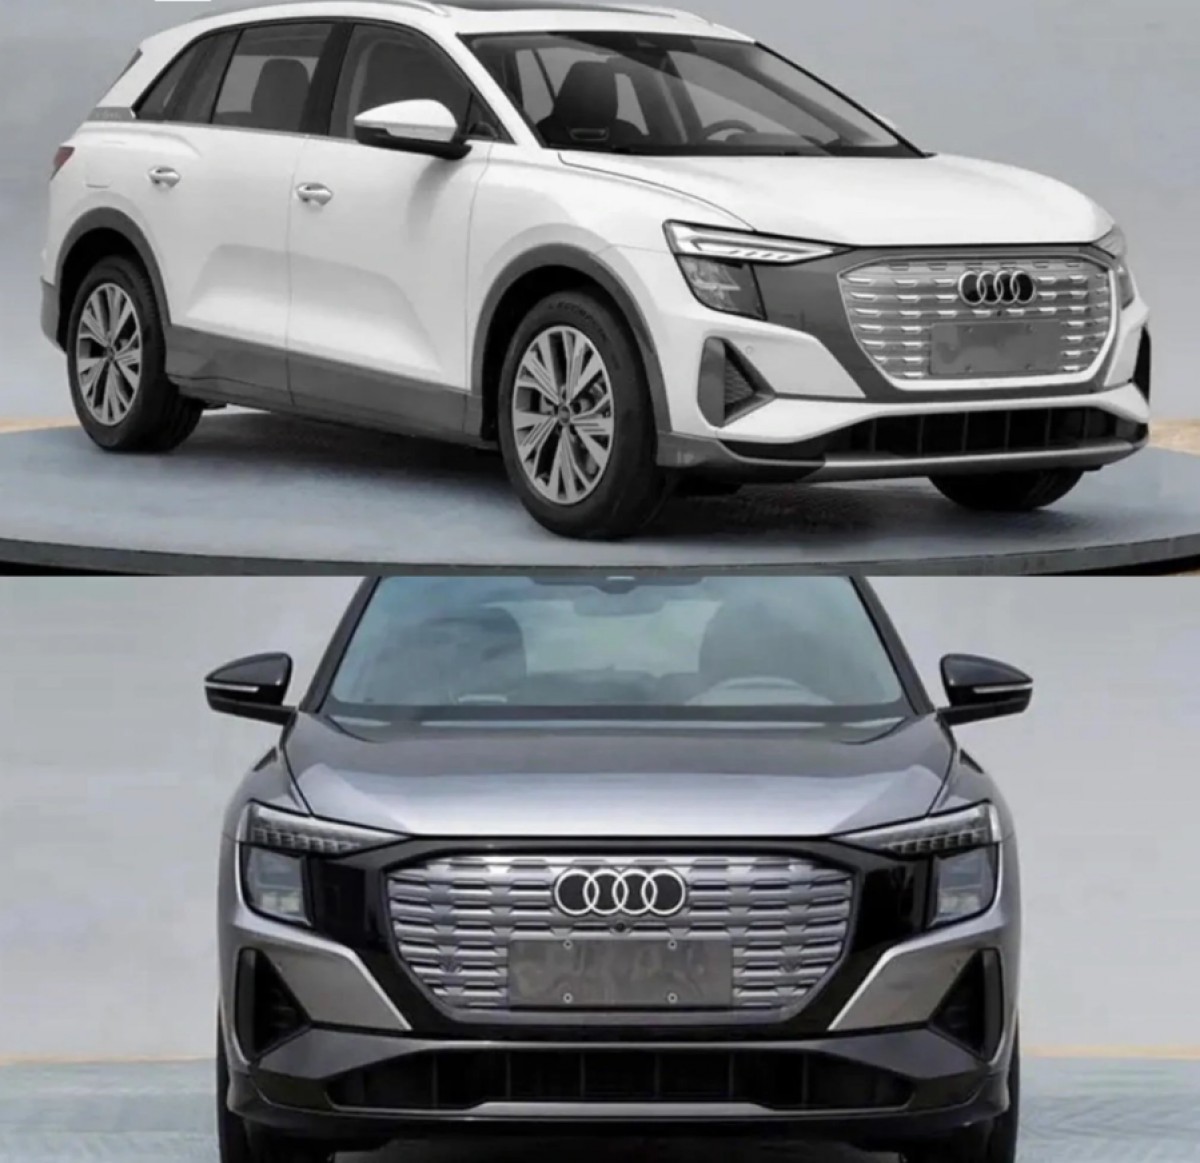 Audi q6 e-tron images leaked by the Chinese MIIT